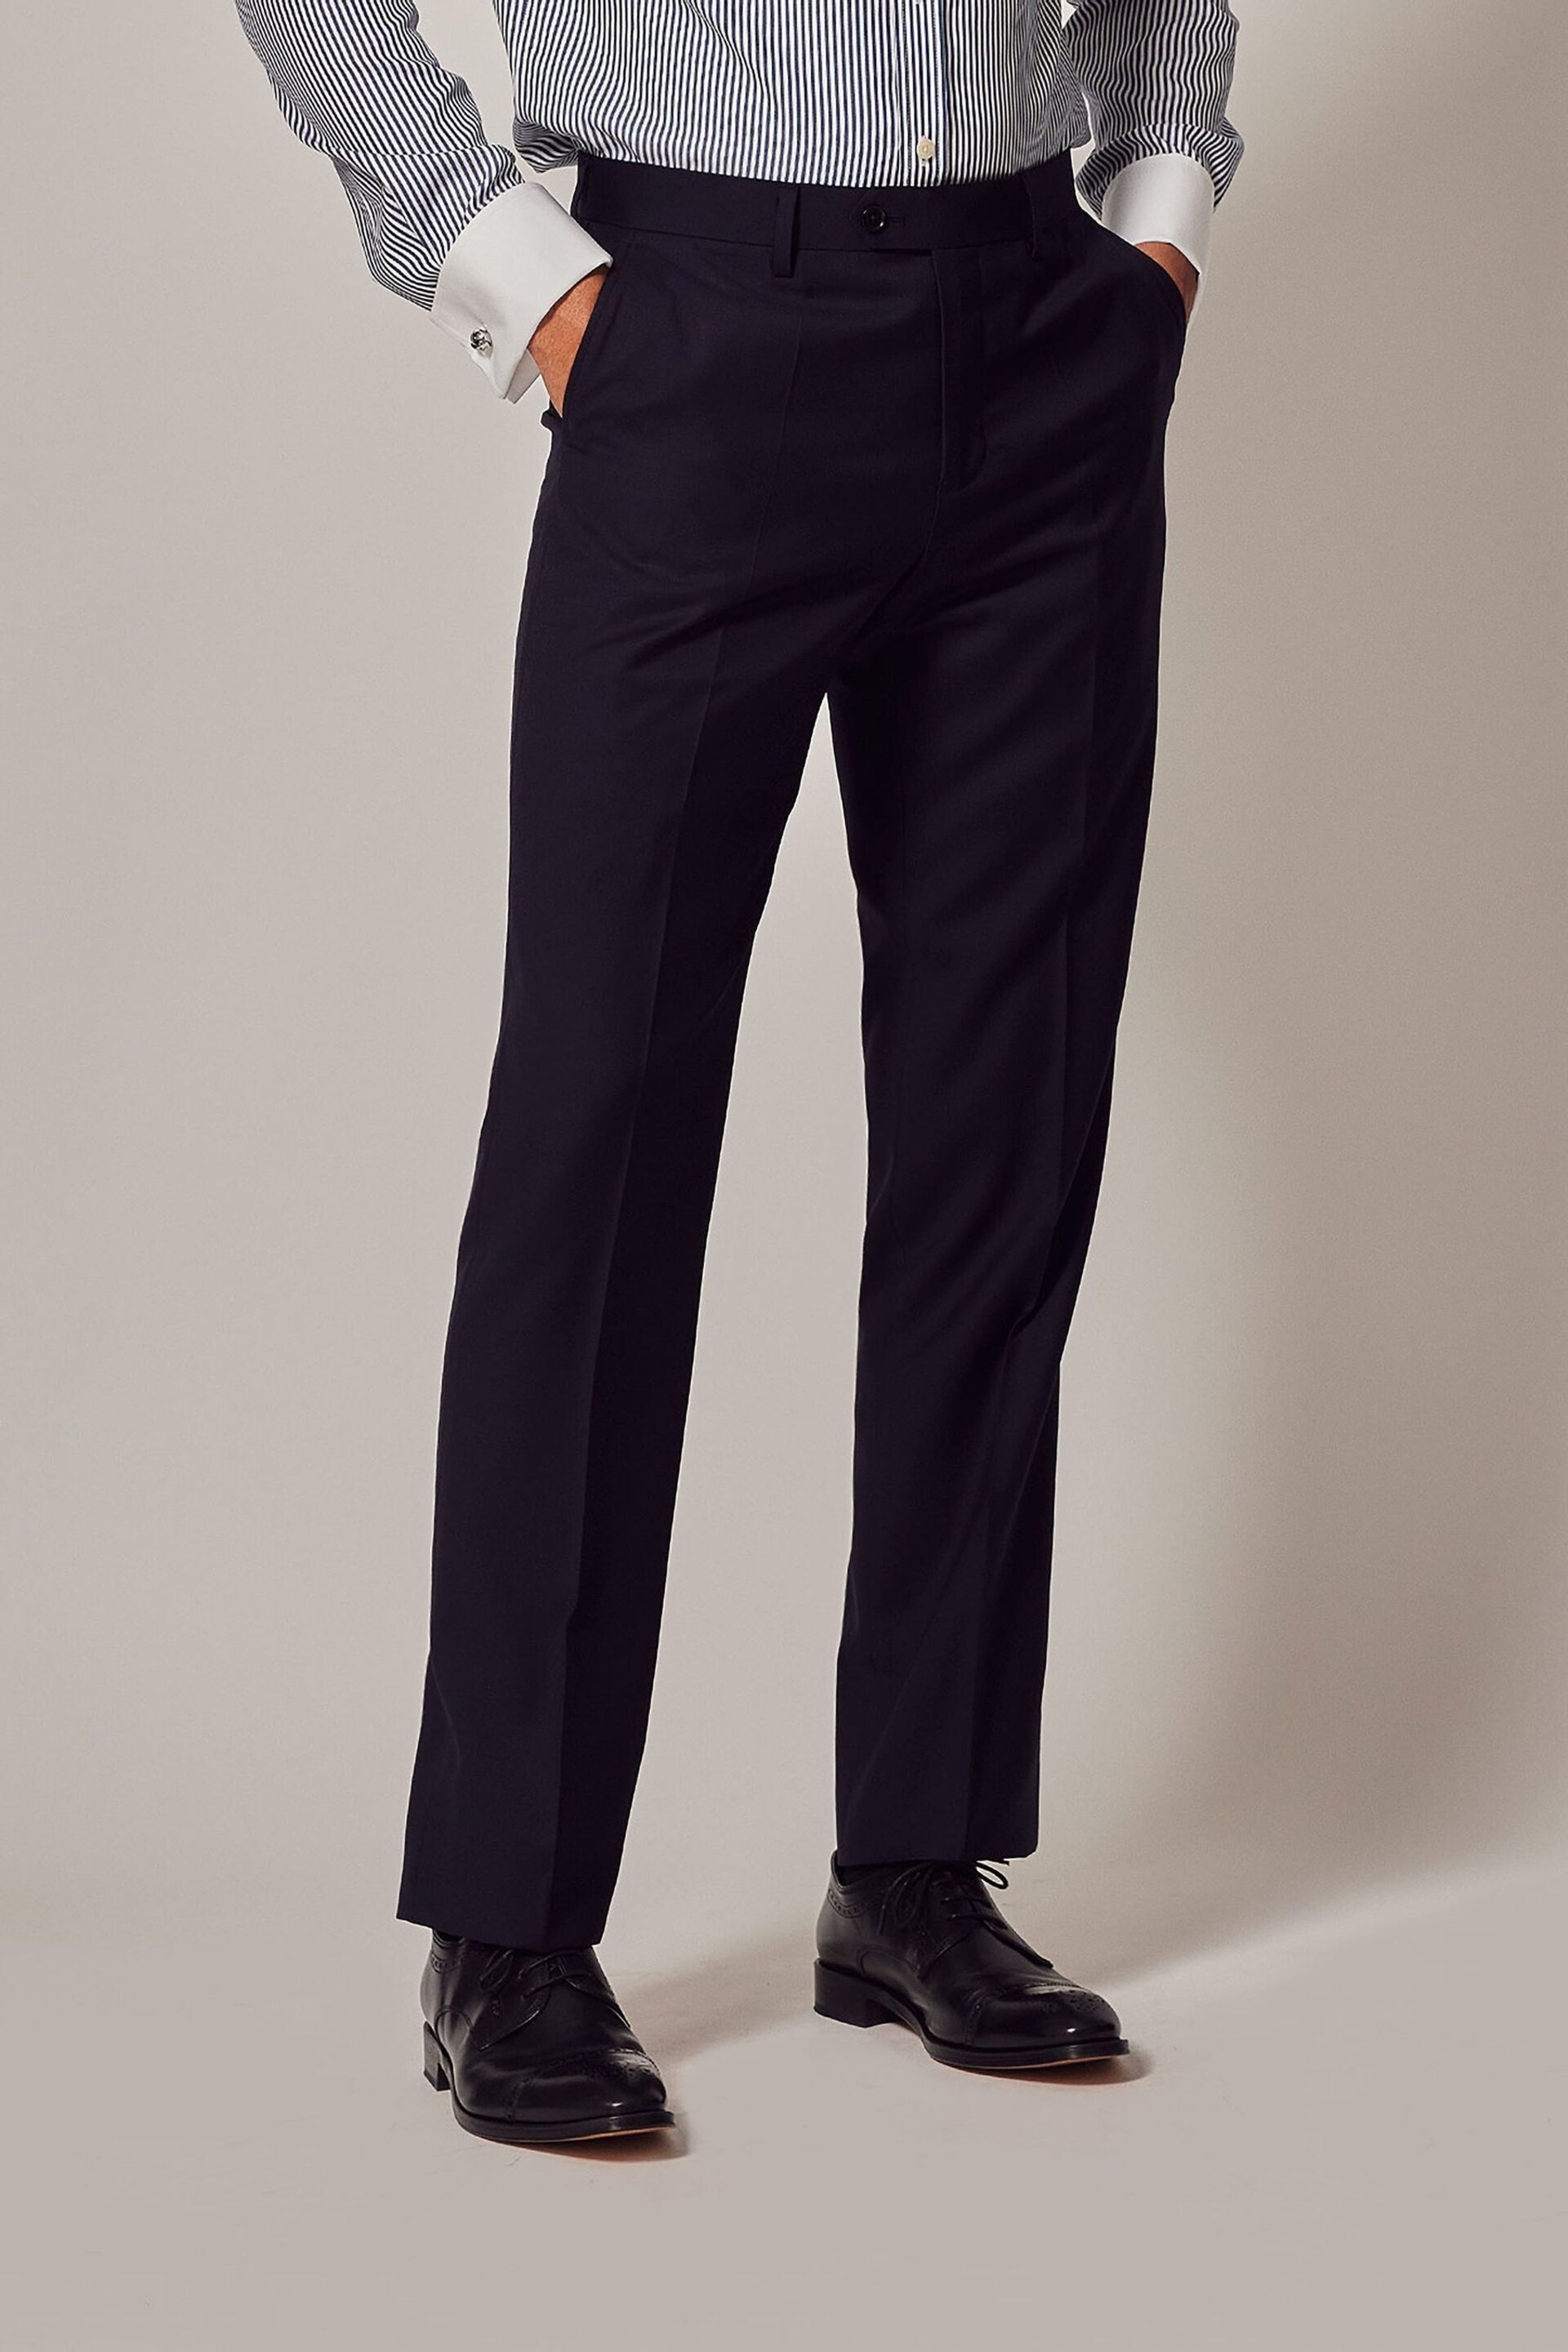 Hawes & Curtis Slim Blue Twill Suit Trousers - Image 1 of 4